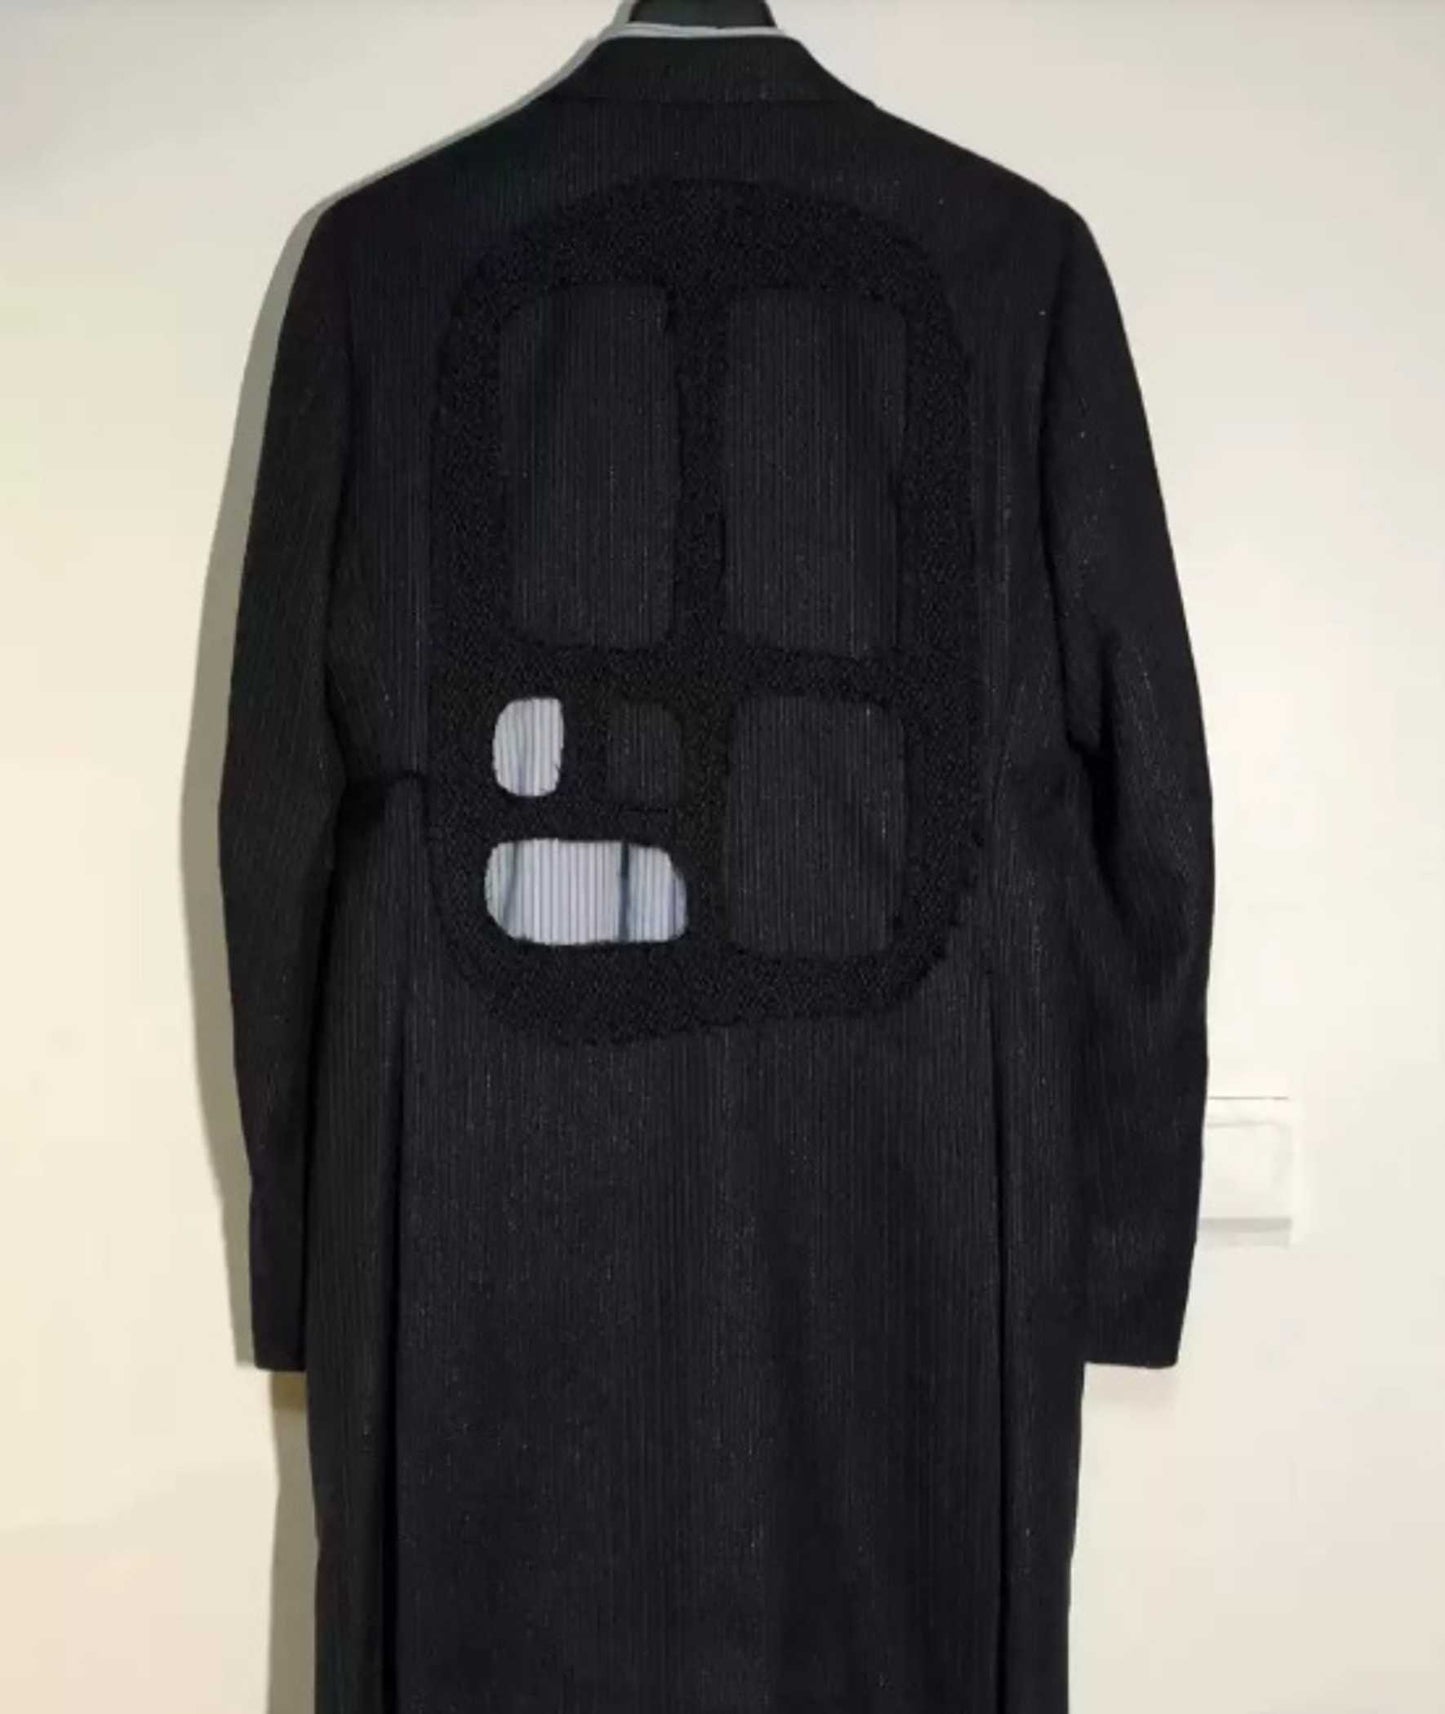 CDG Homme Plus 14AW "Holy Jacket" Hollow-Carved Suit JKT